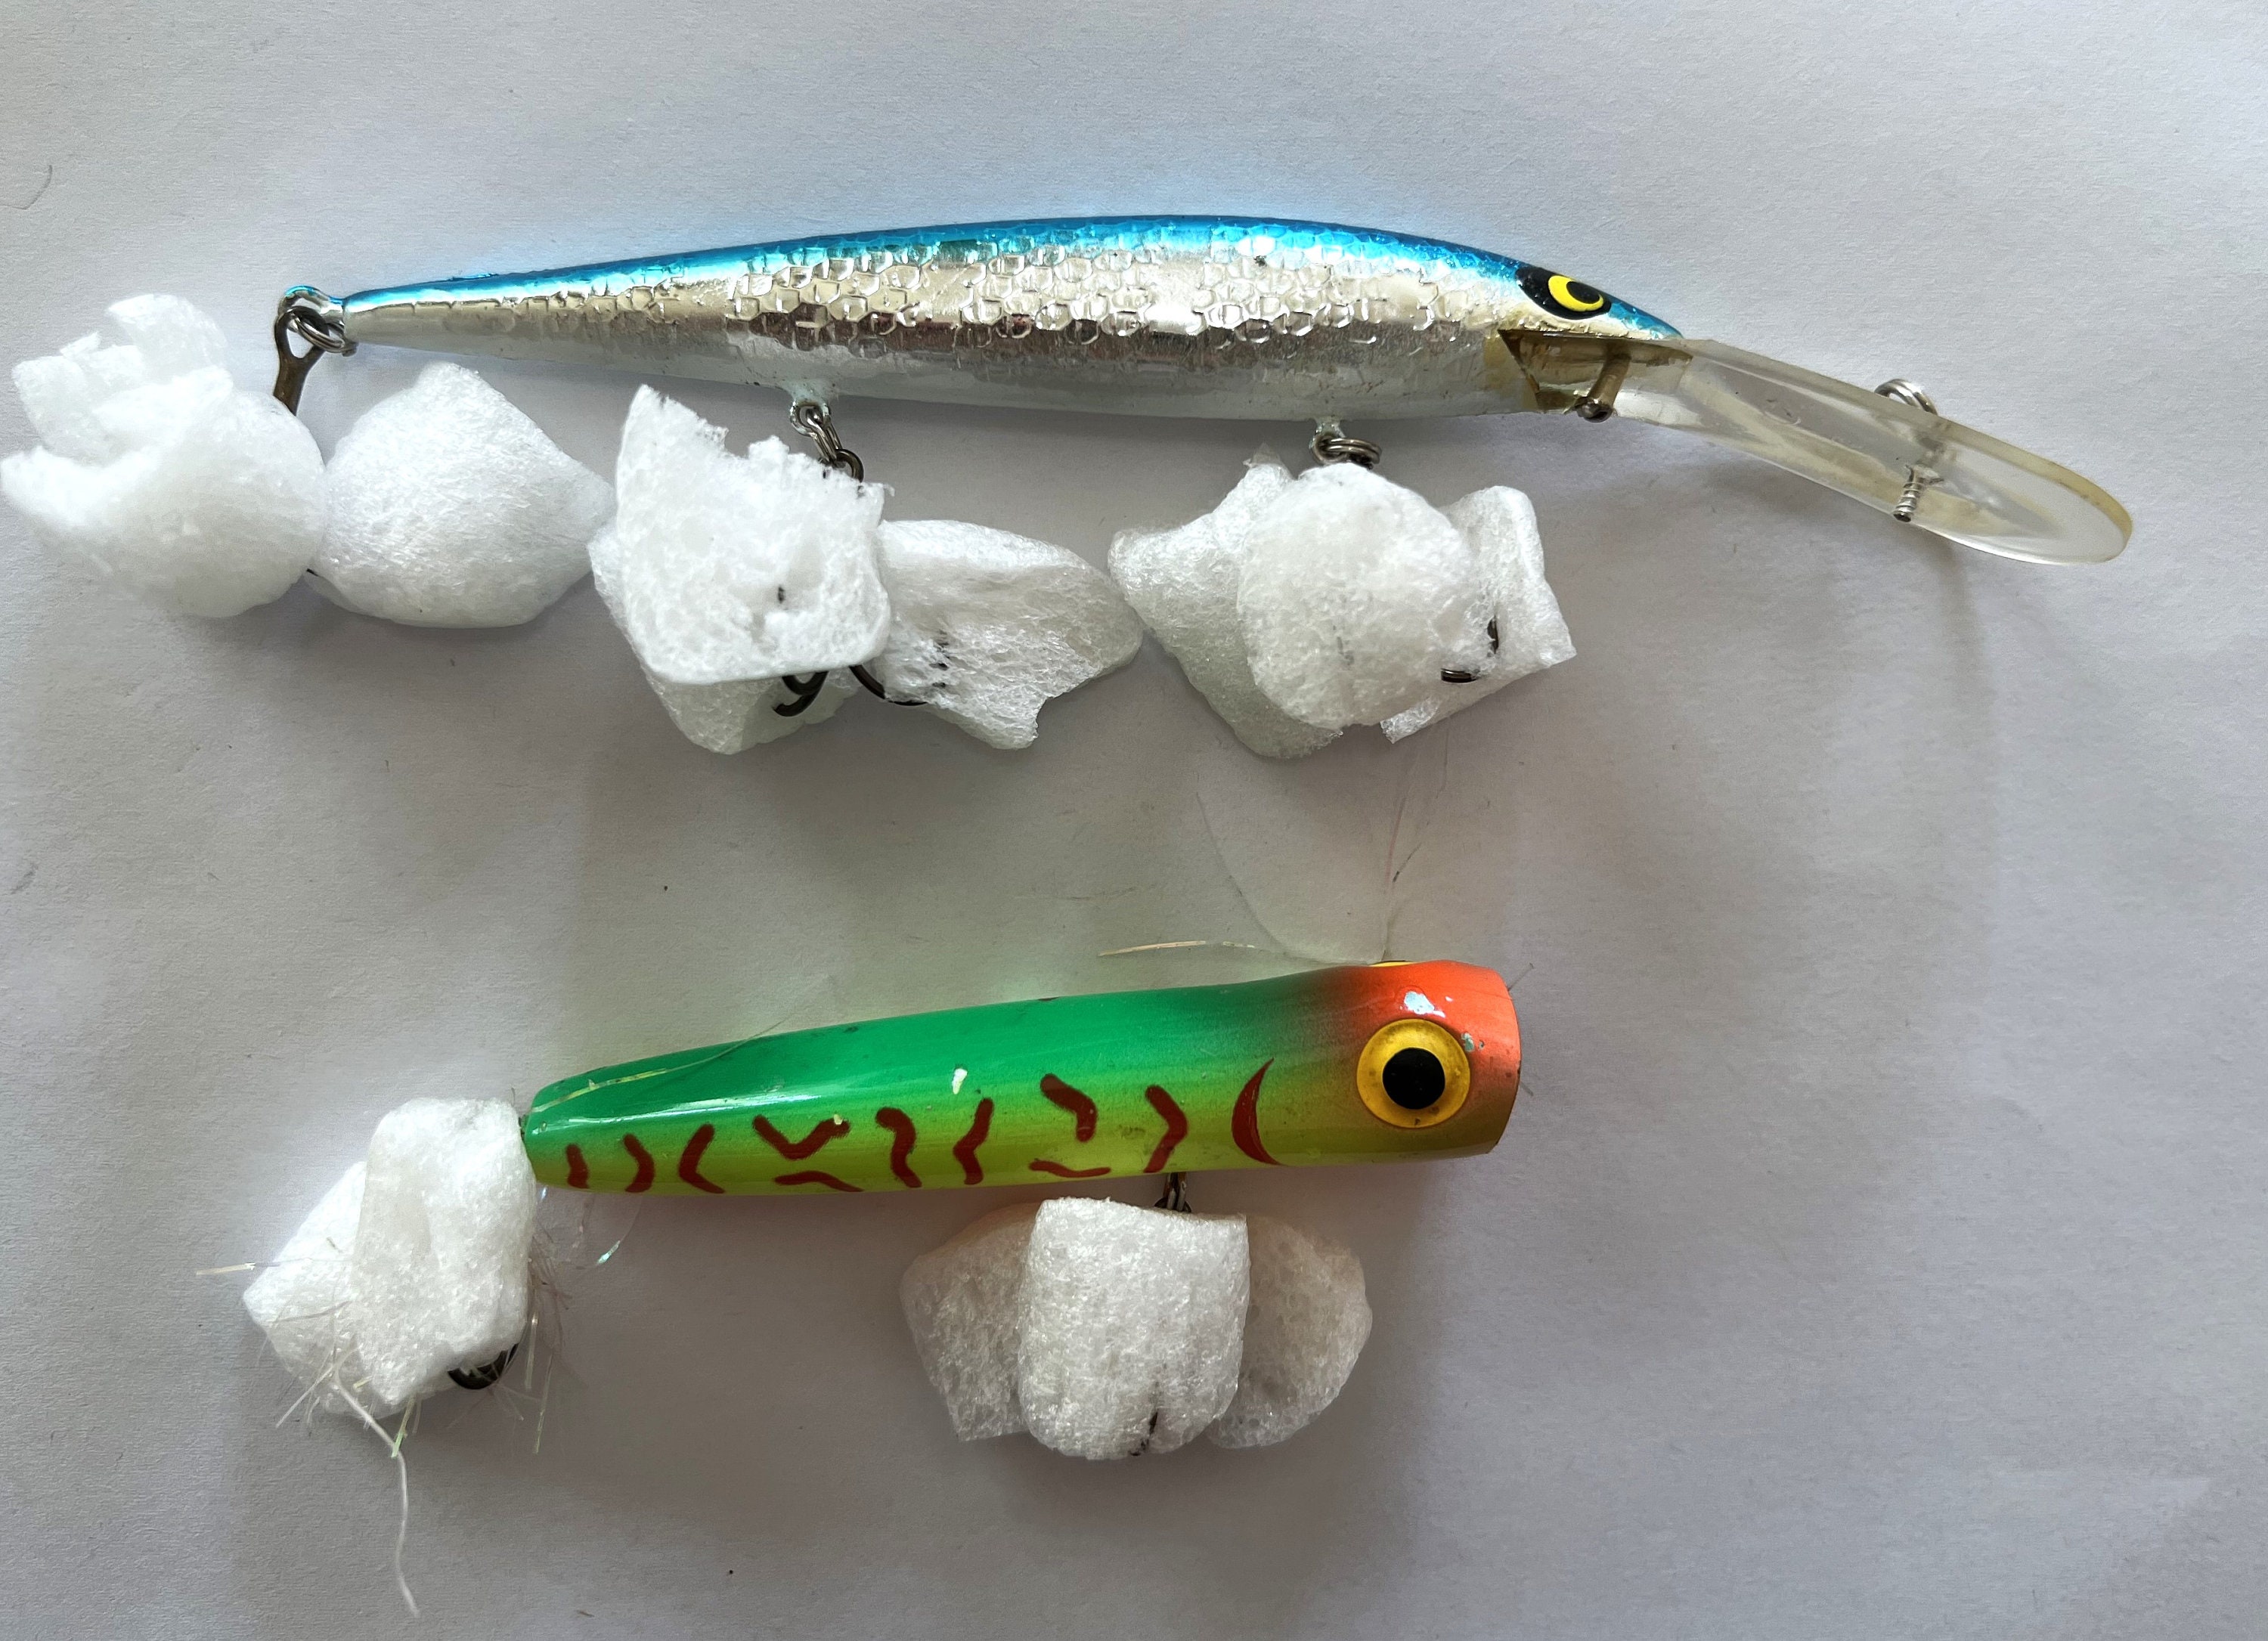 Storm Lures 